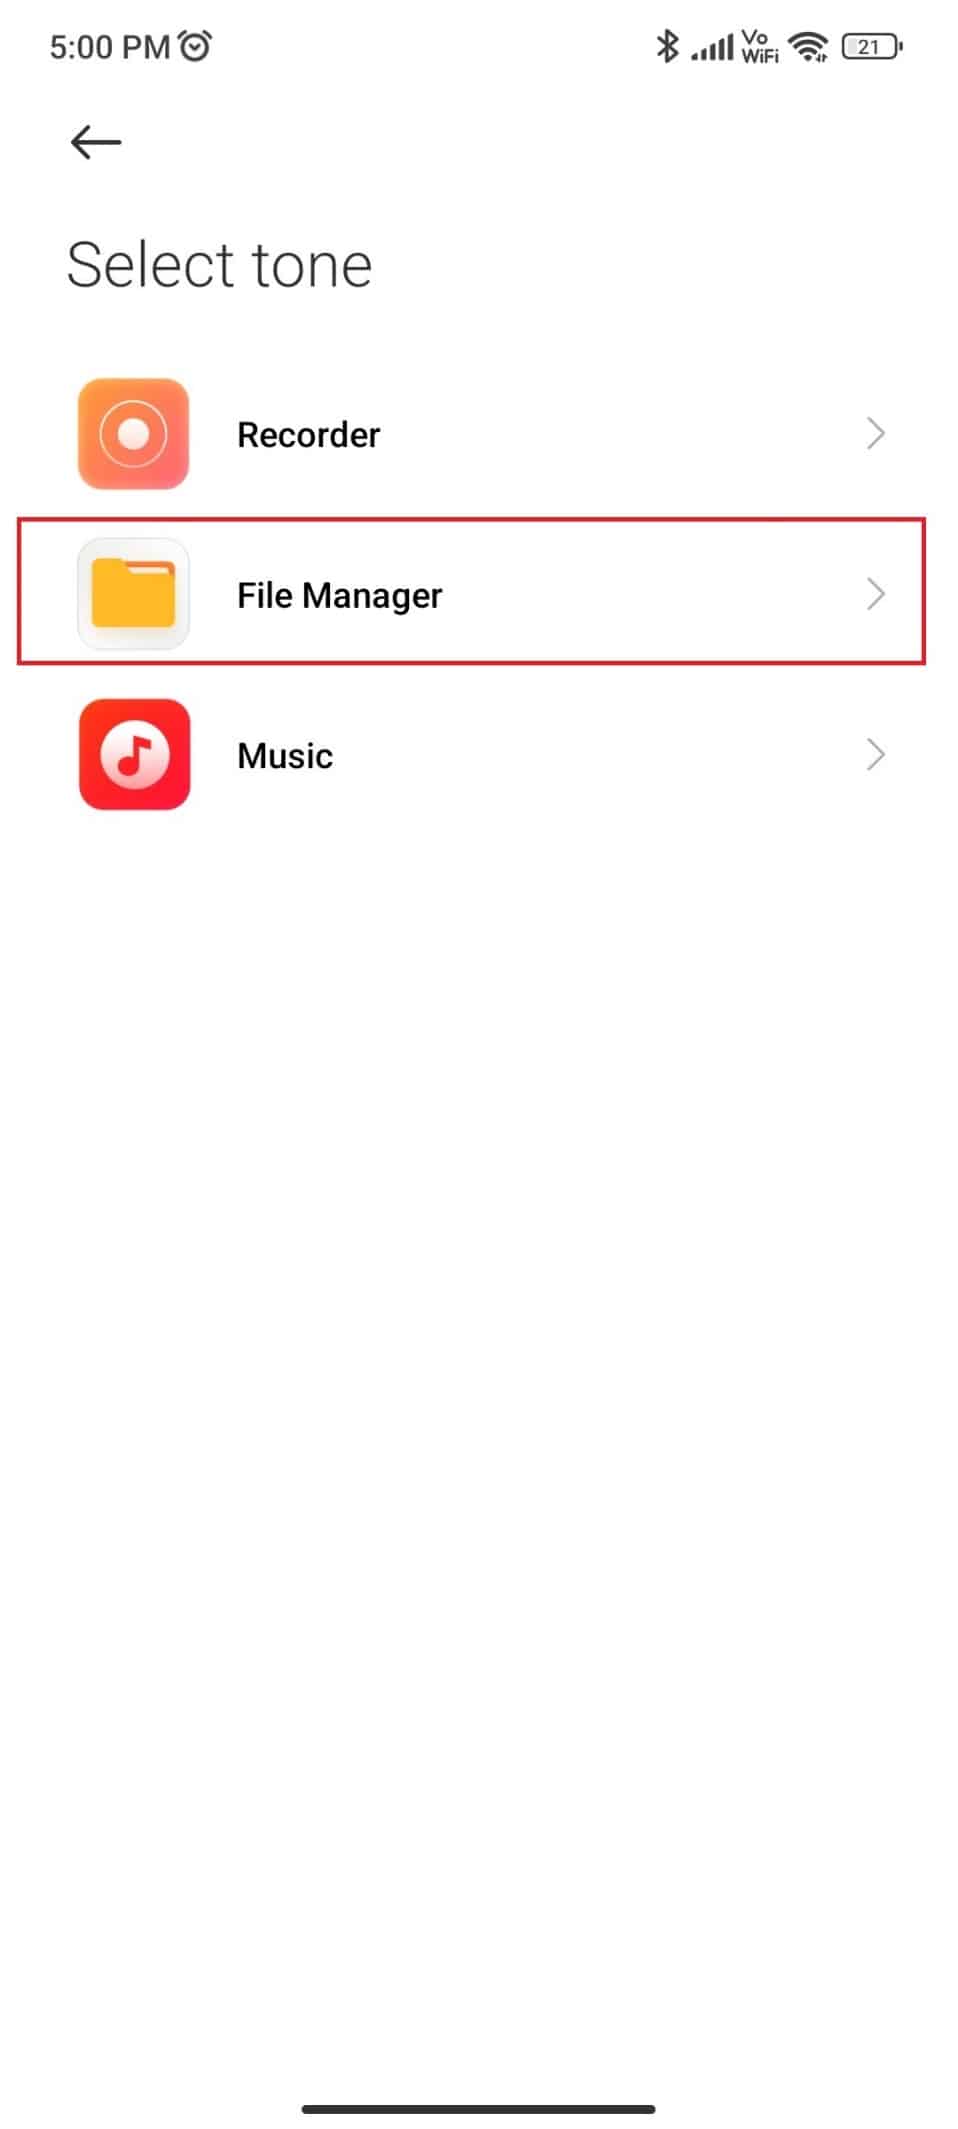 Tocca File Manager